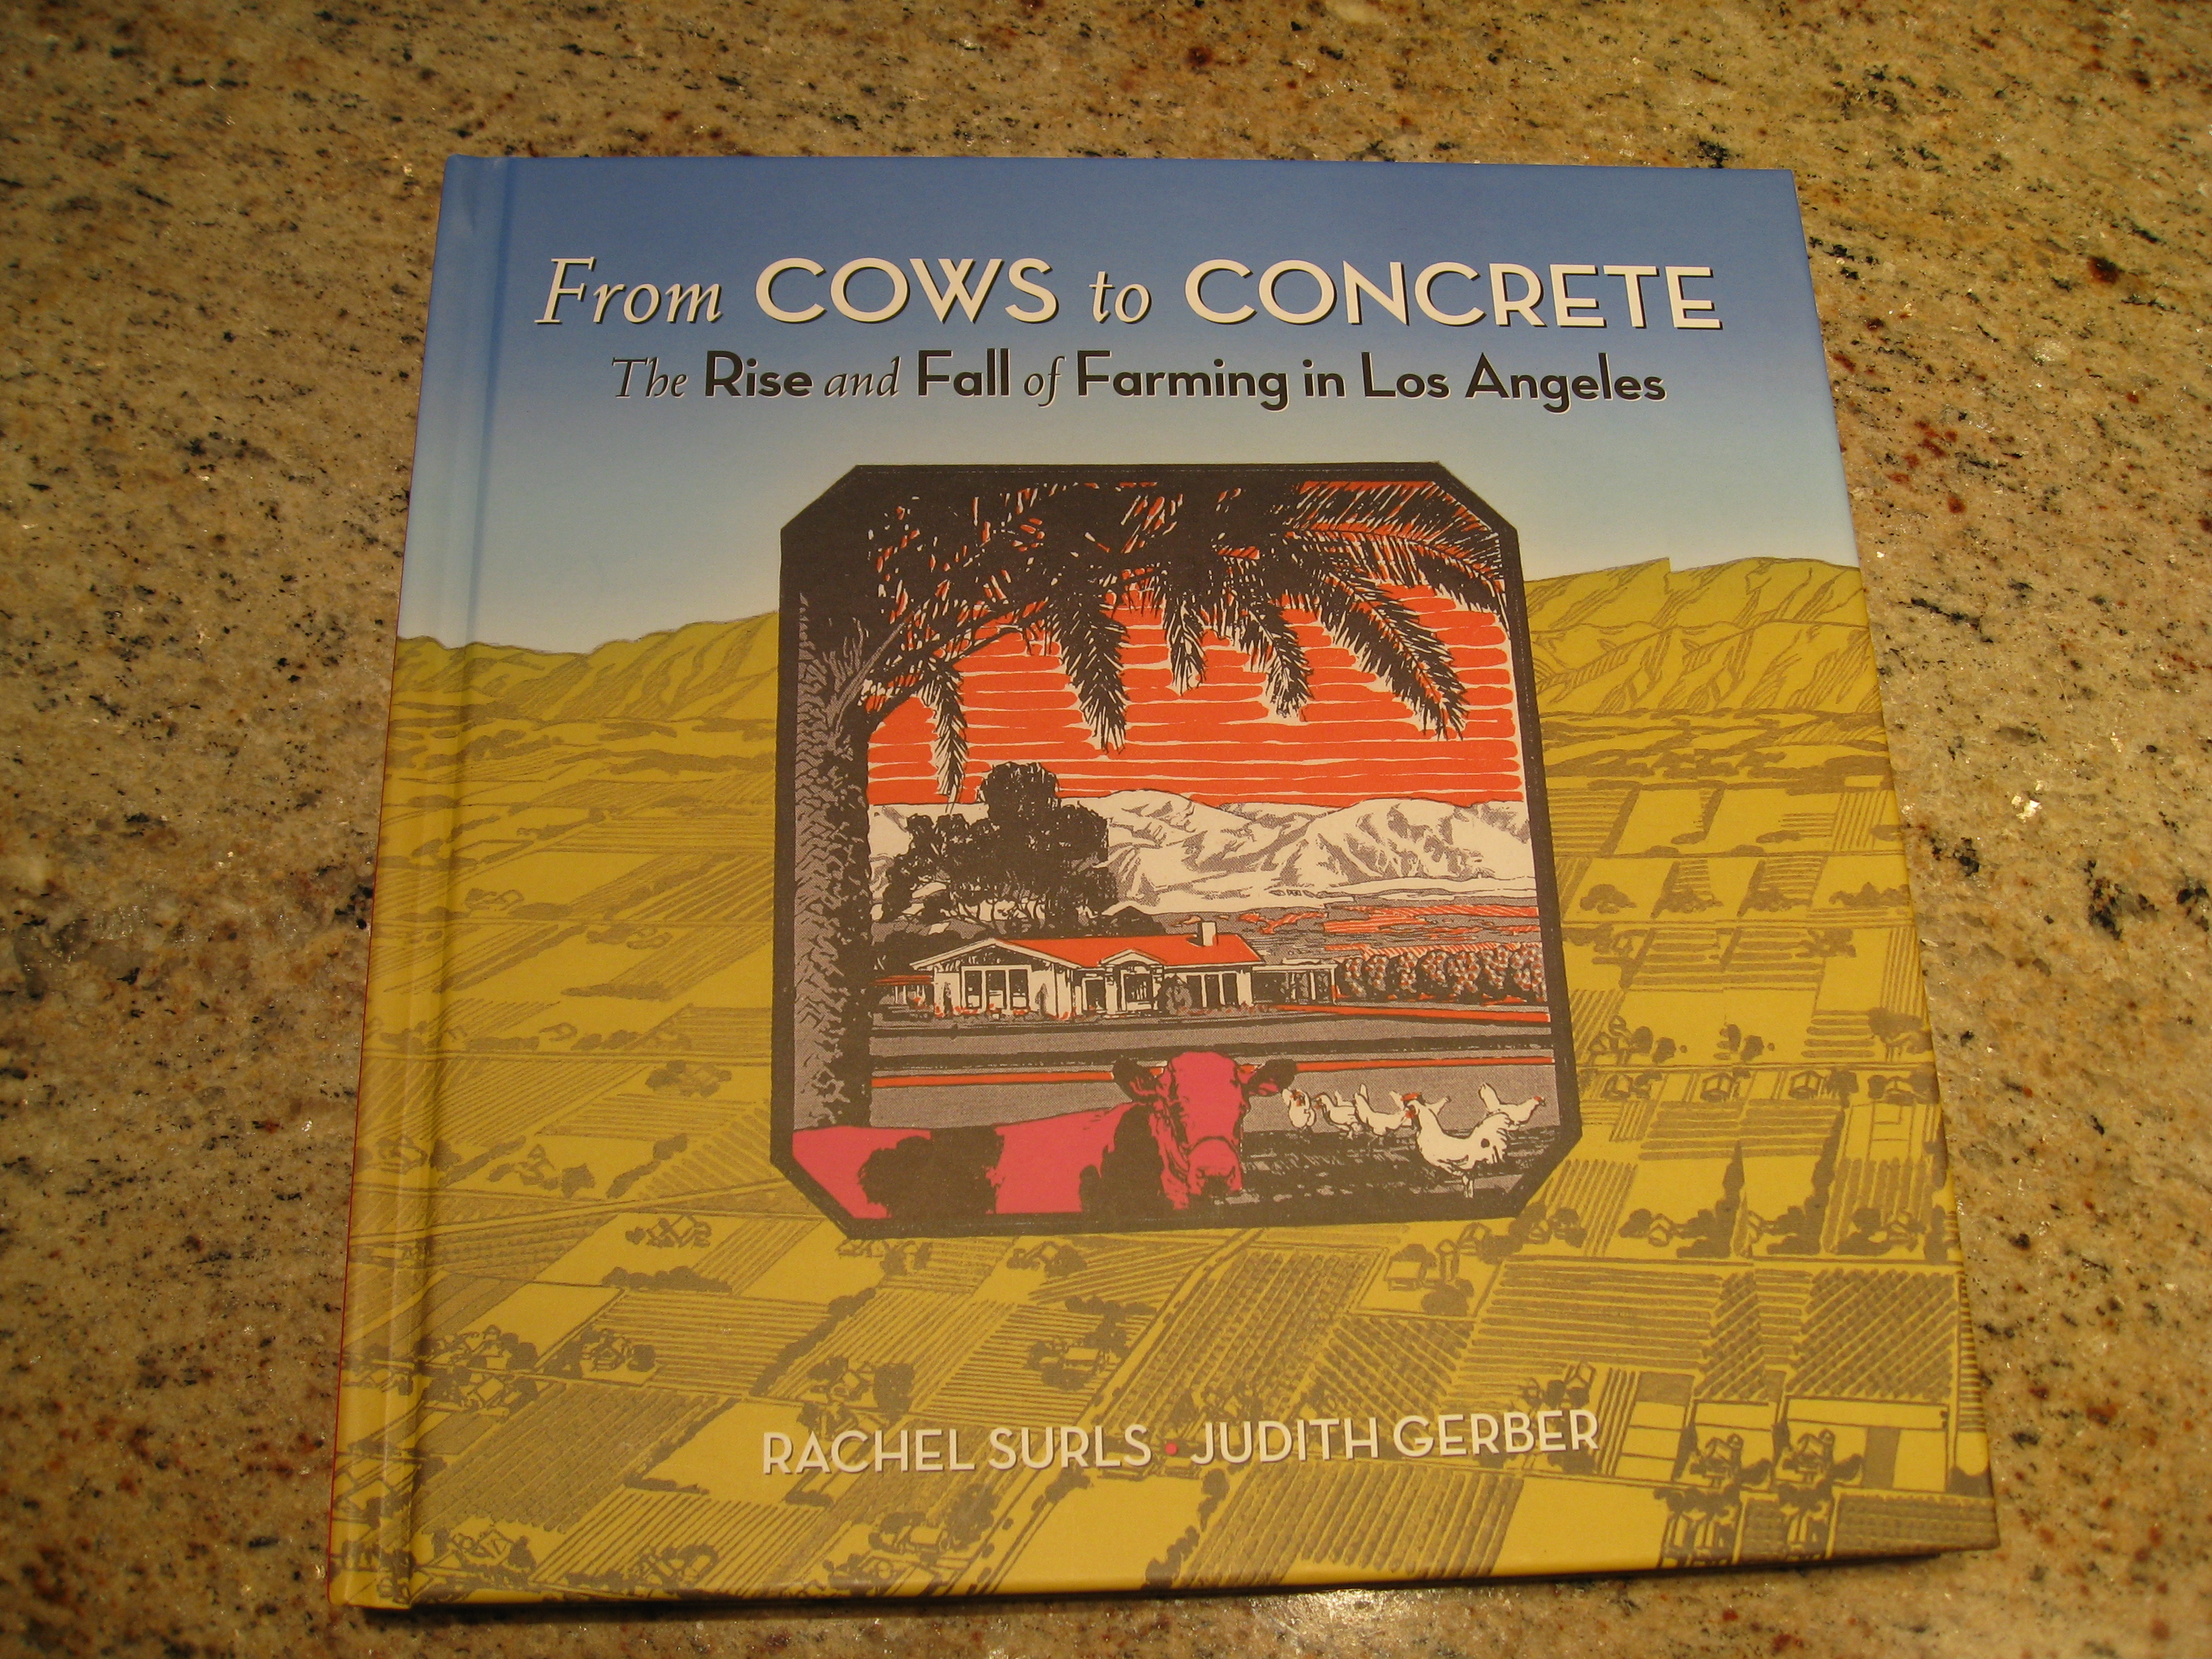 From Cows to Concrete, with a cover image borrowed from the Homestead Museum in City of Industry.